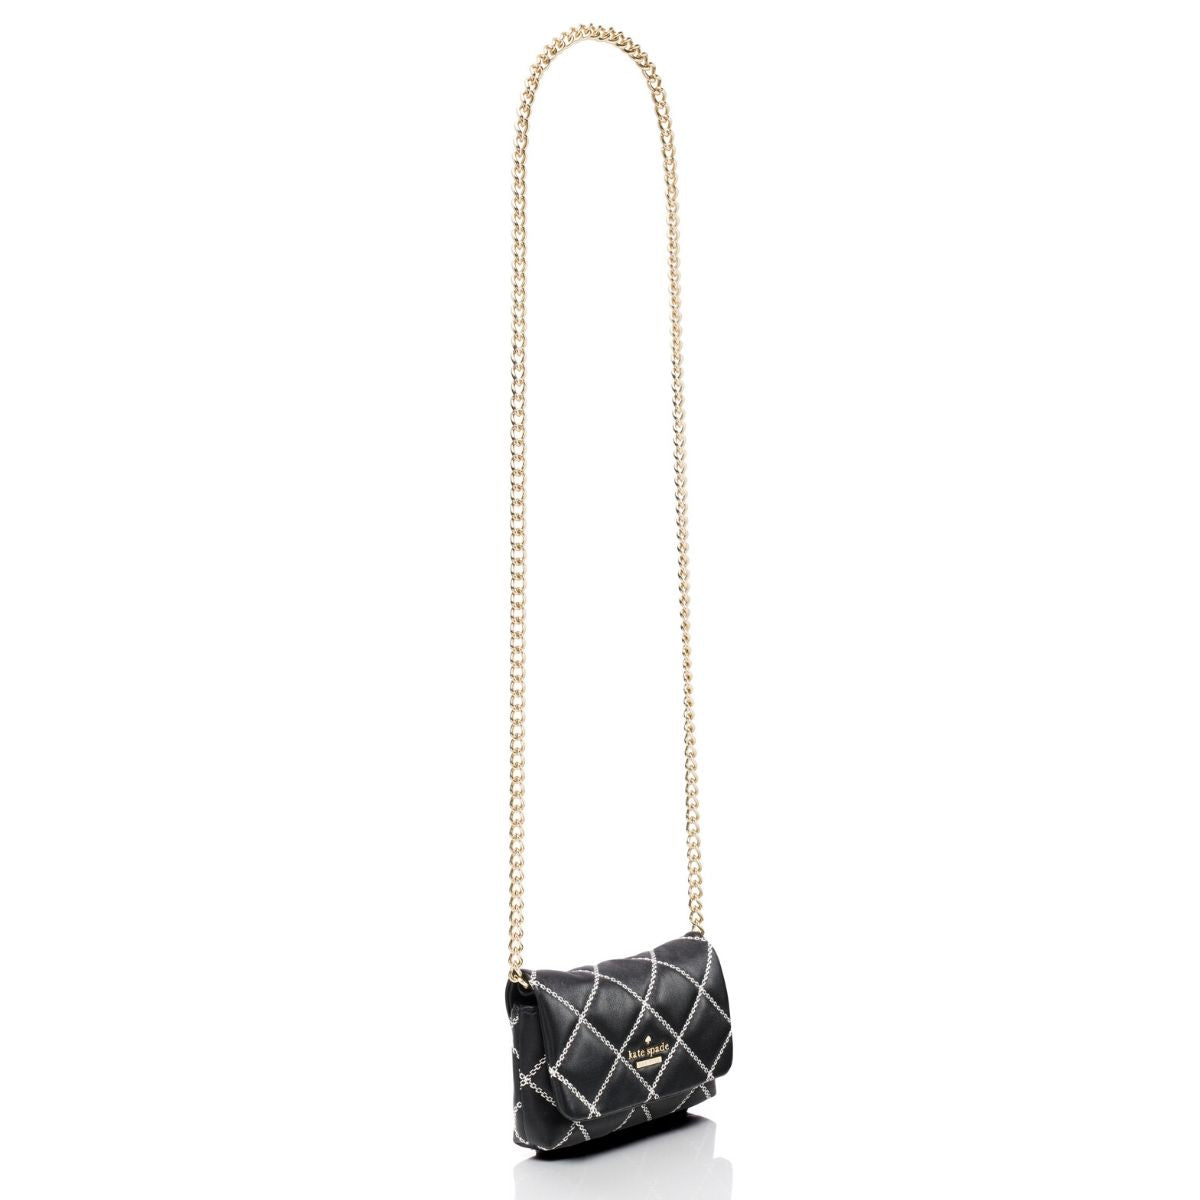 Kate Spade Chain-Link Quilted Bag - Black